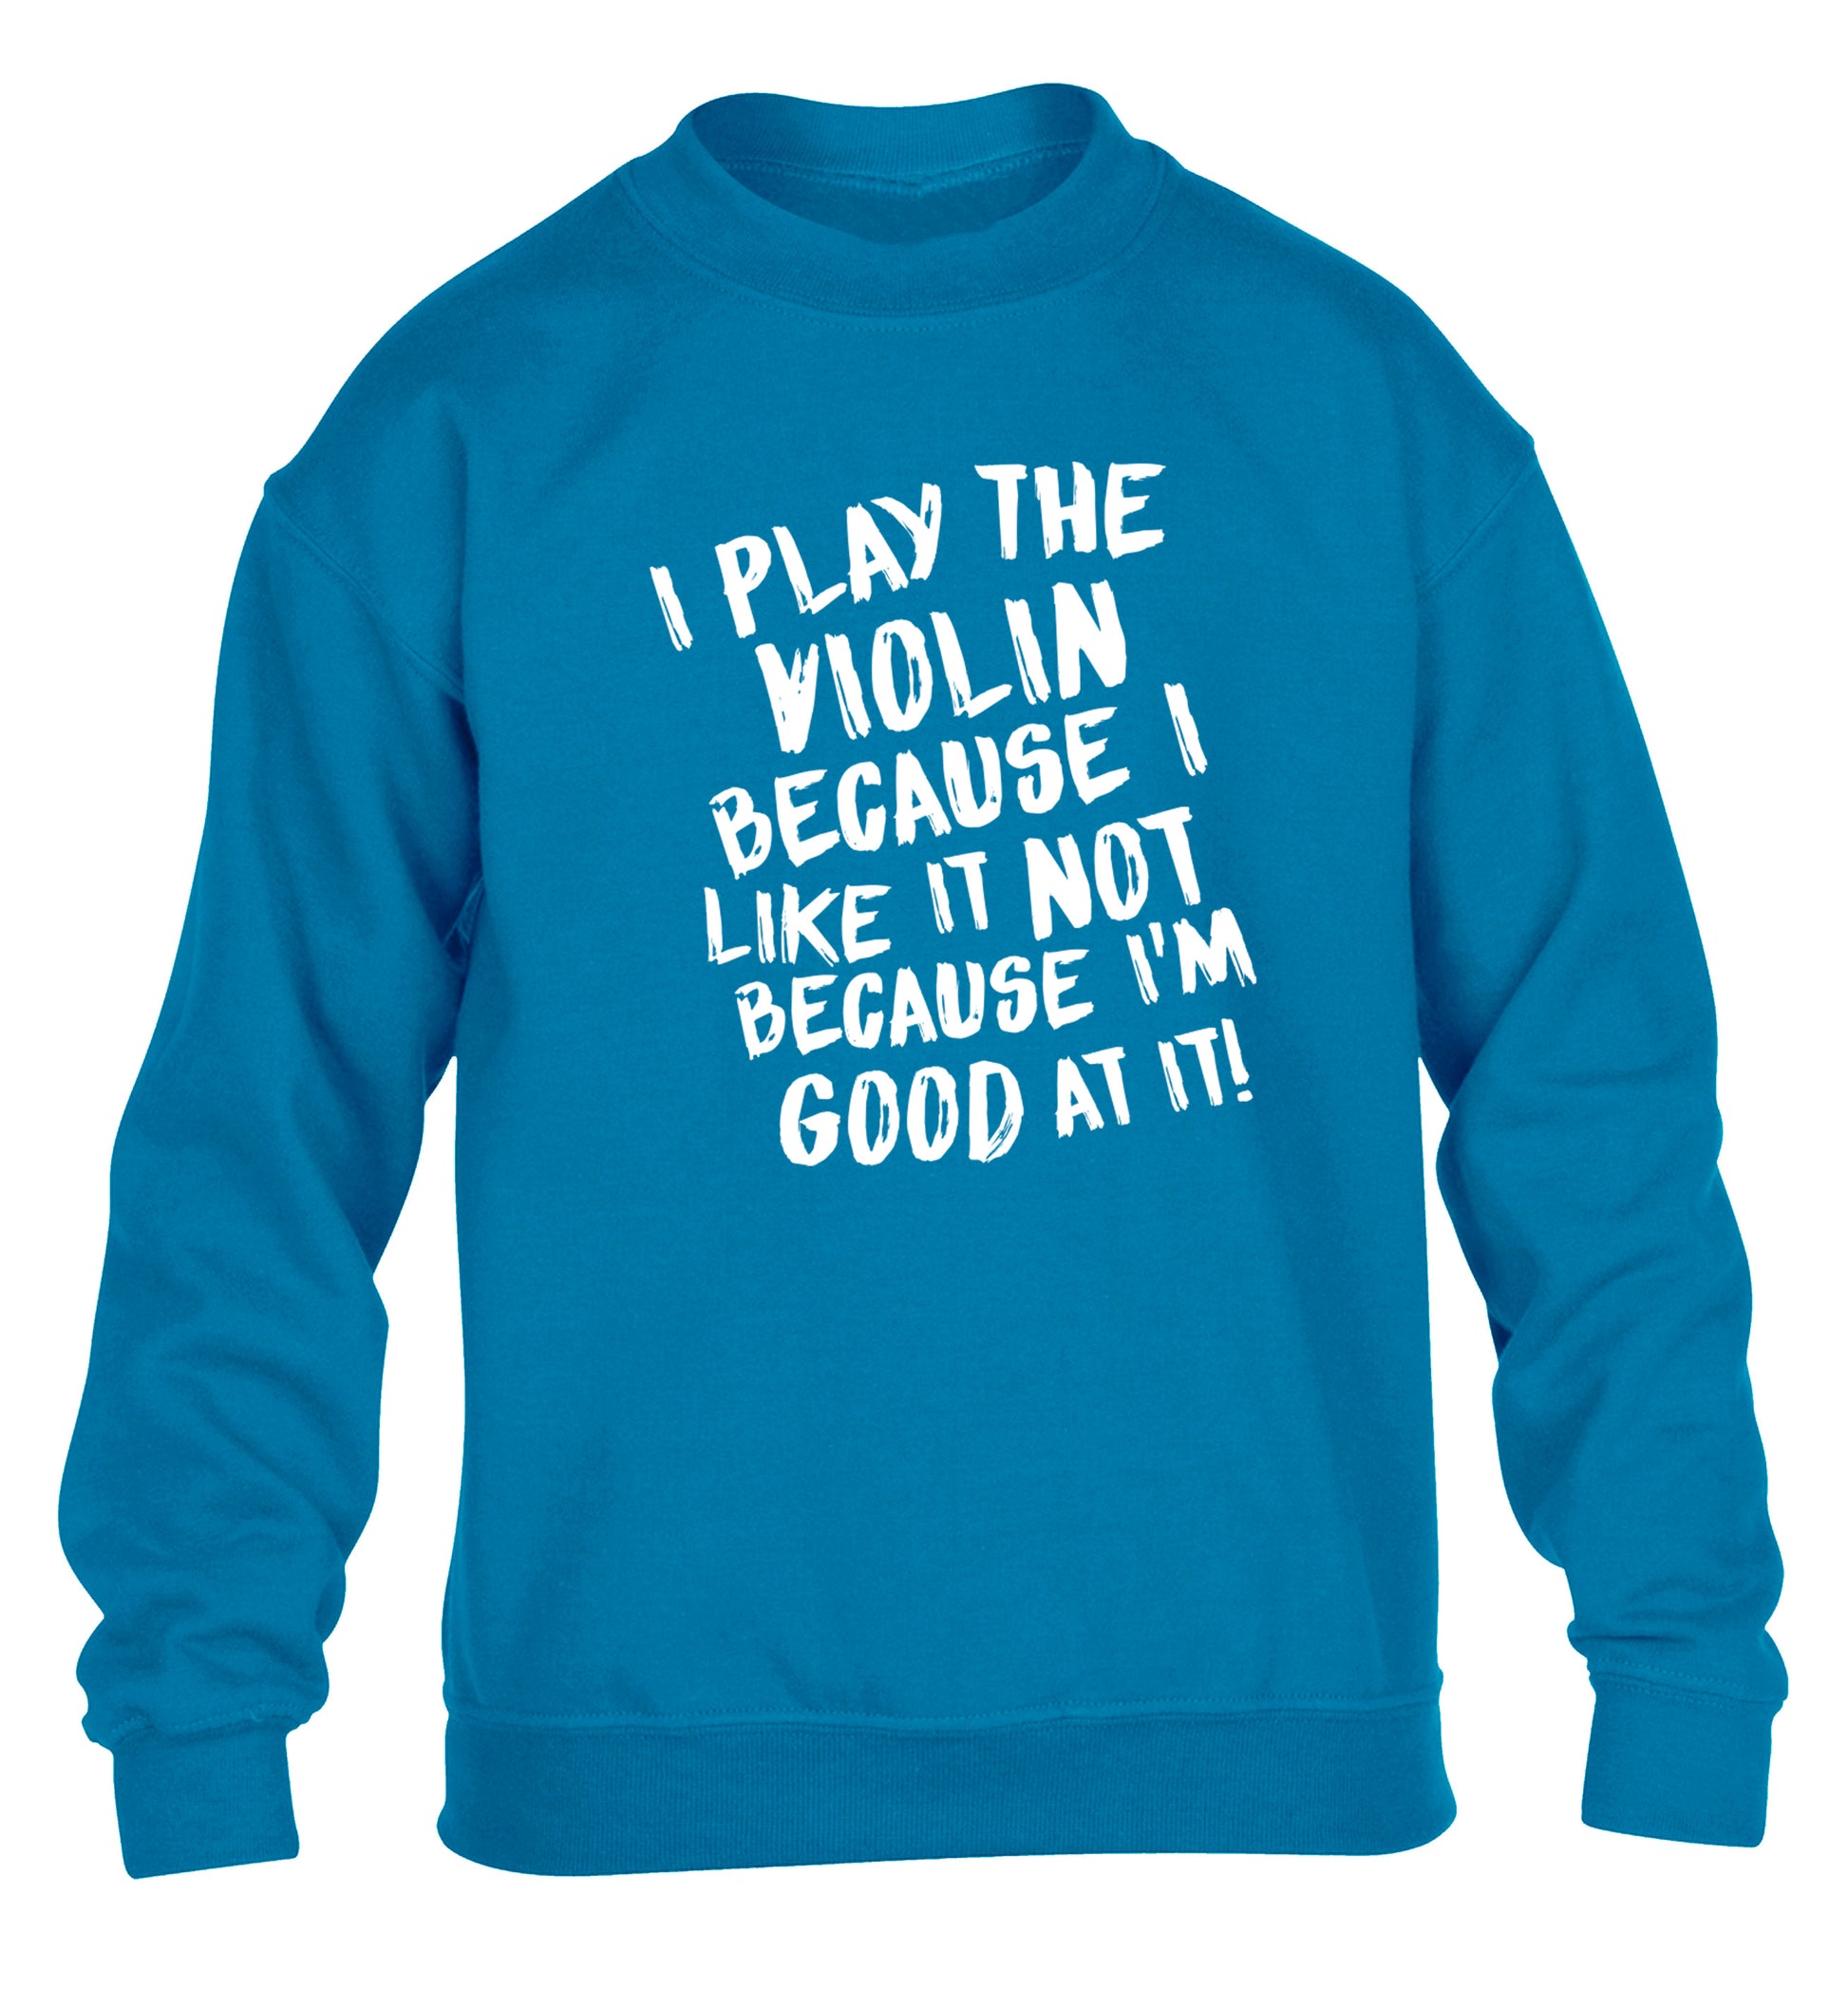 I play the violin because I like it not because I'm good at it children's blue sweater 12-13 Years